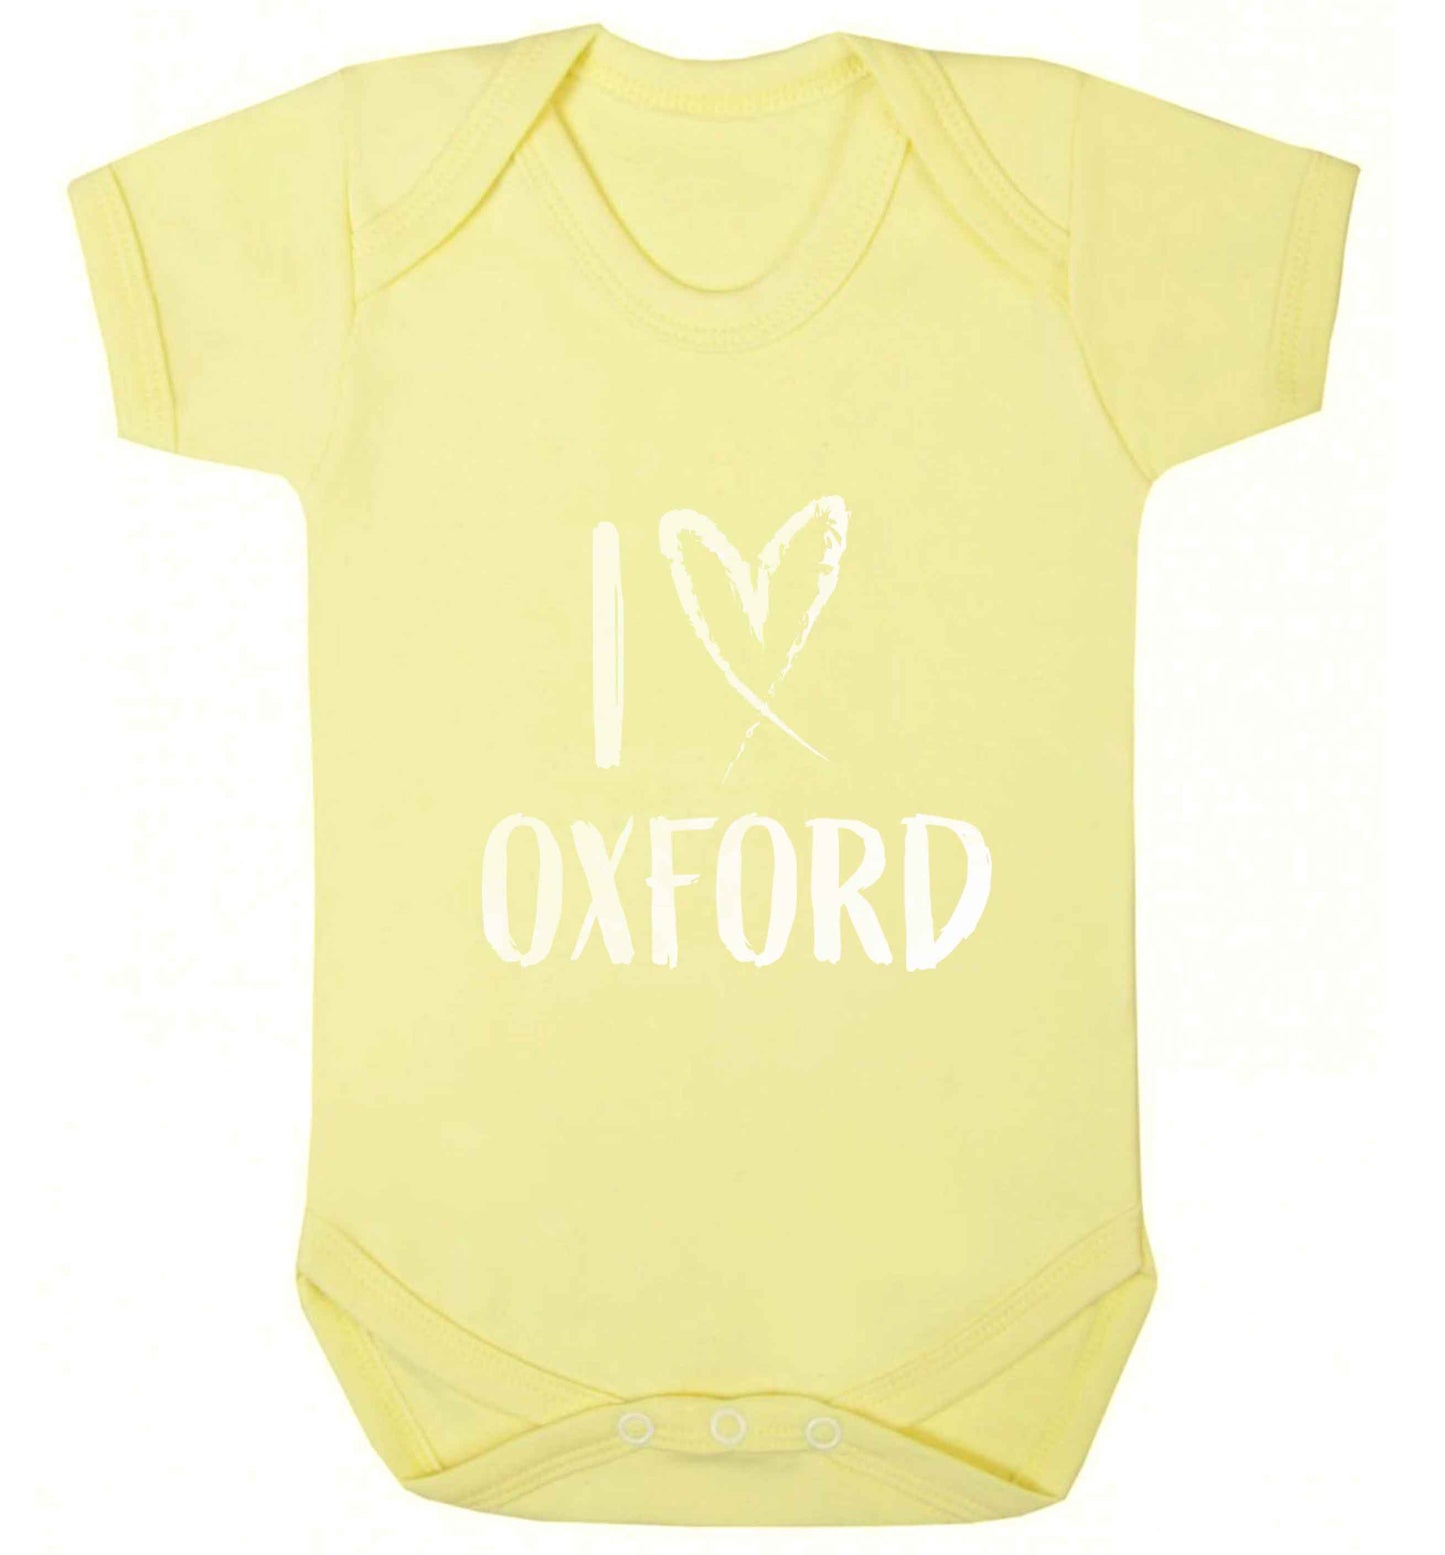 I love Oxford baby vest pale yellow 18-24 months